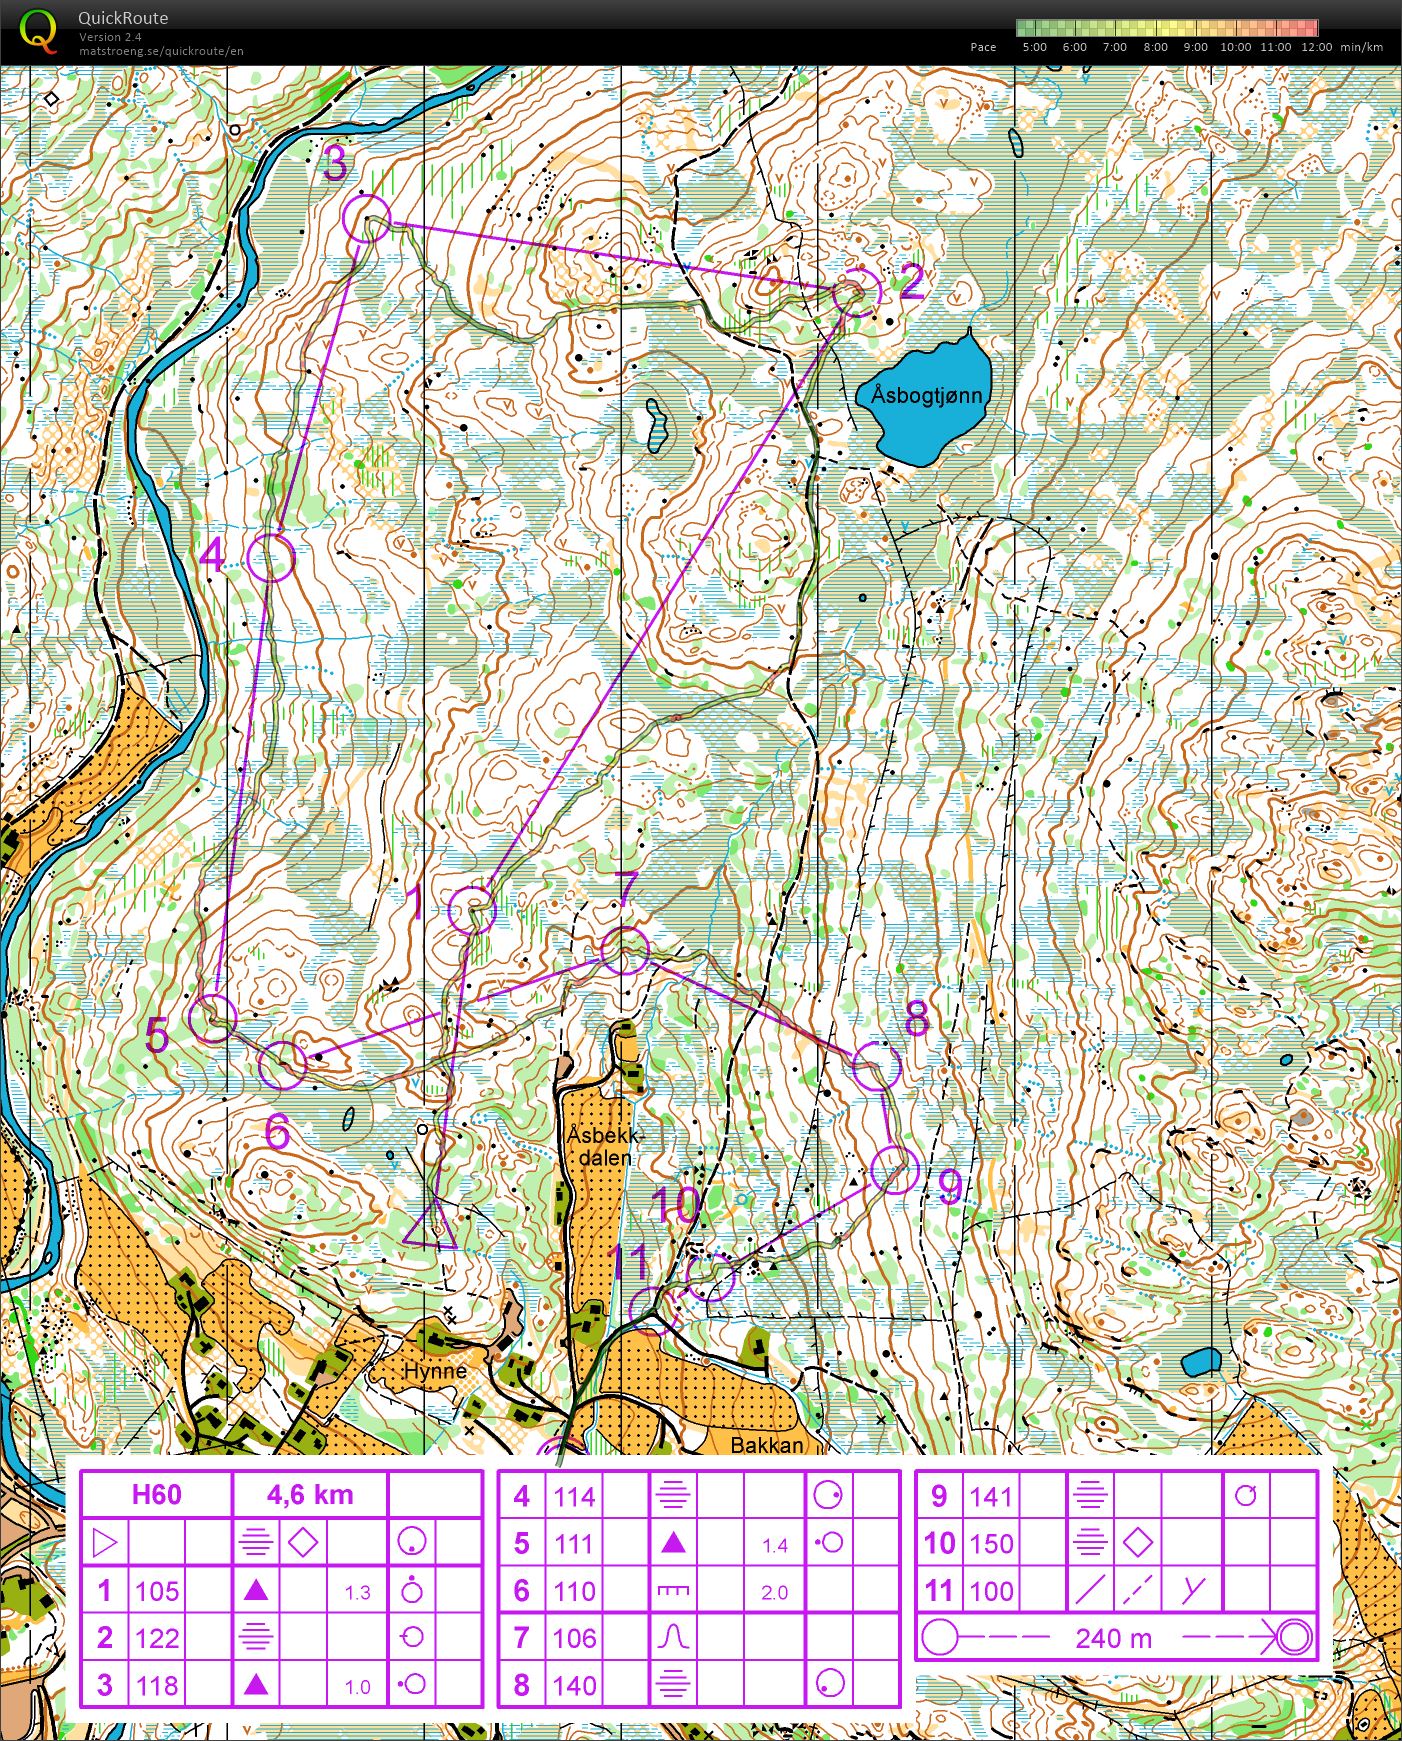 Re-run of H60 Long course from VM in Rauland (12-10-2017)